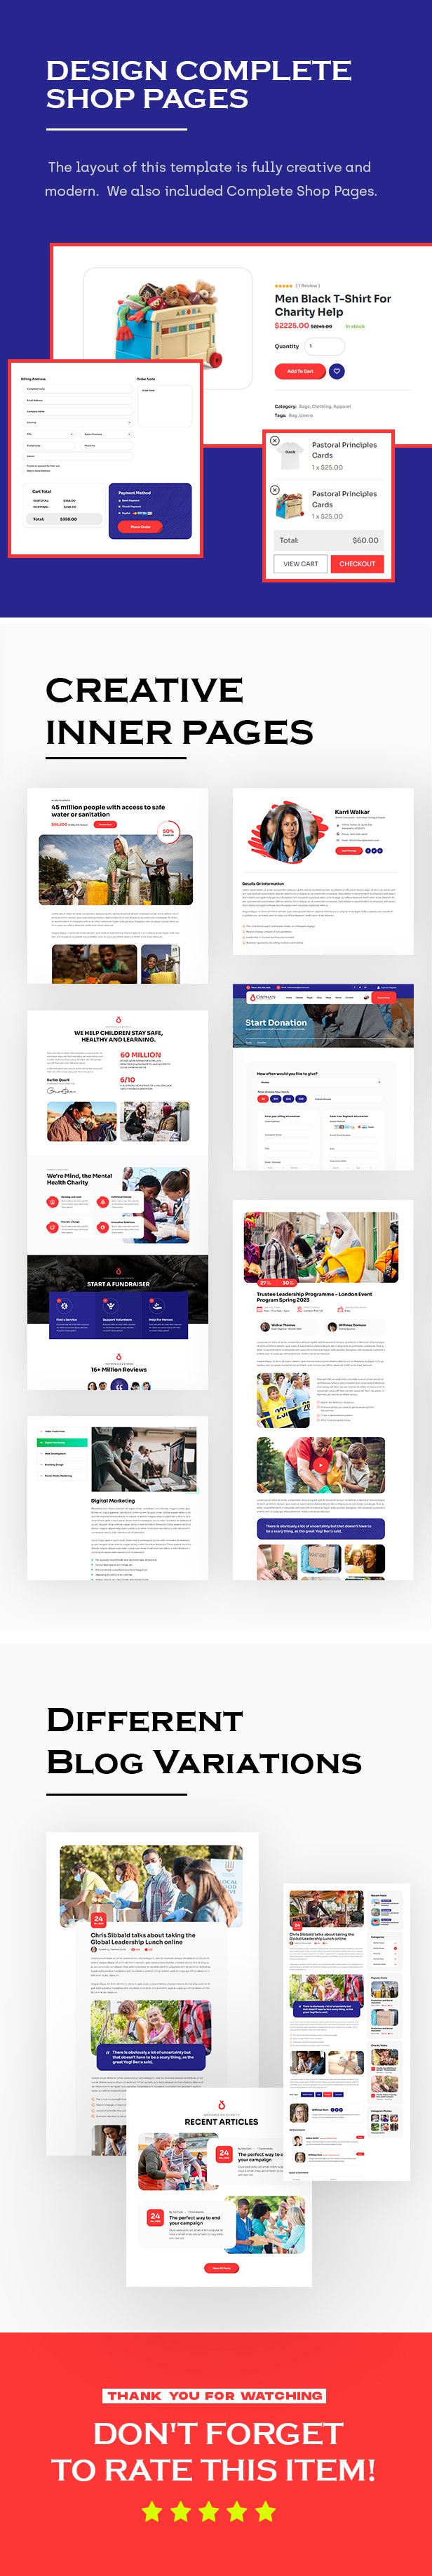 Orphan - Charity and Fundraising Non-Profit HTML Template - 2